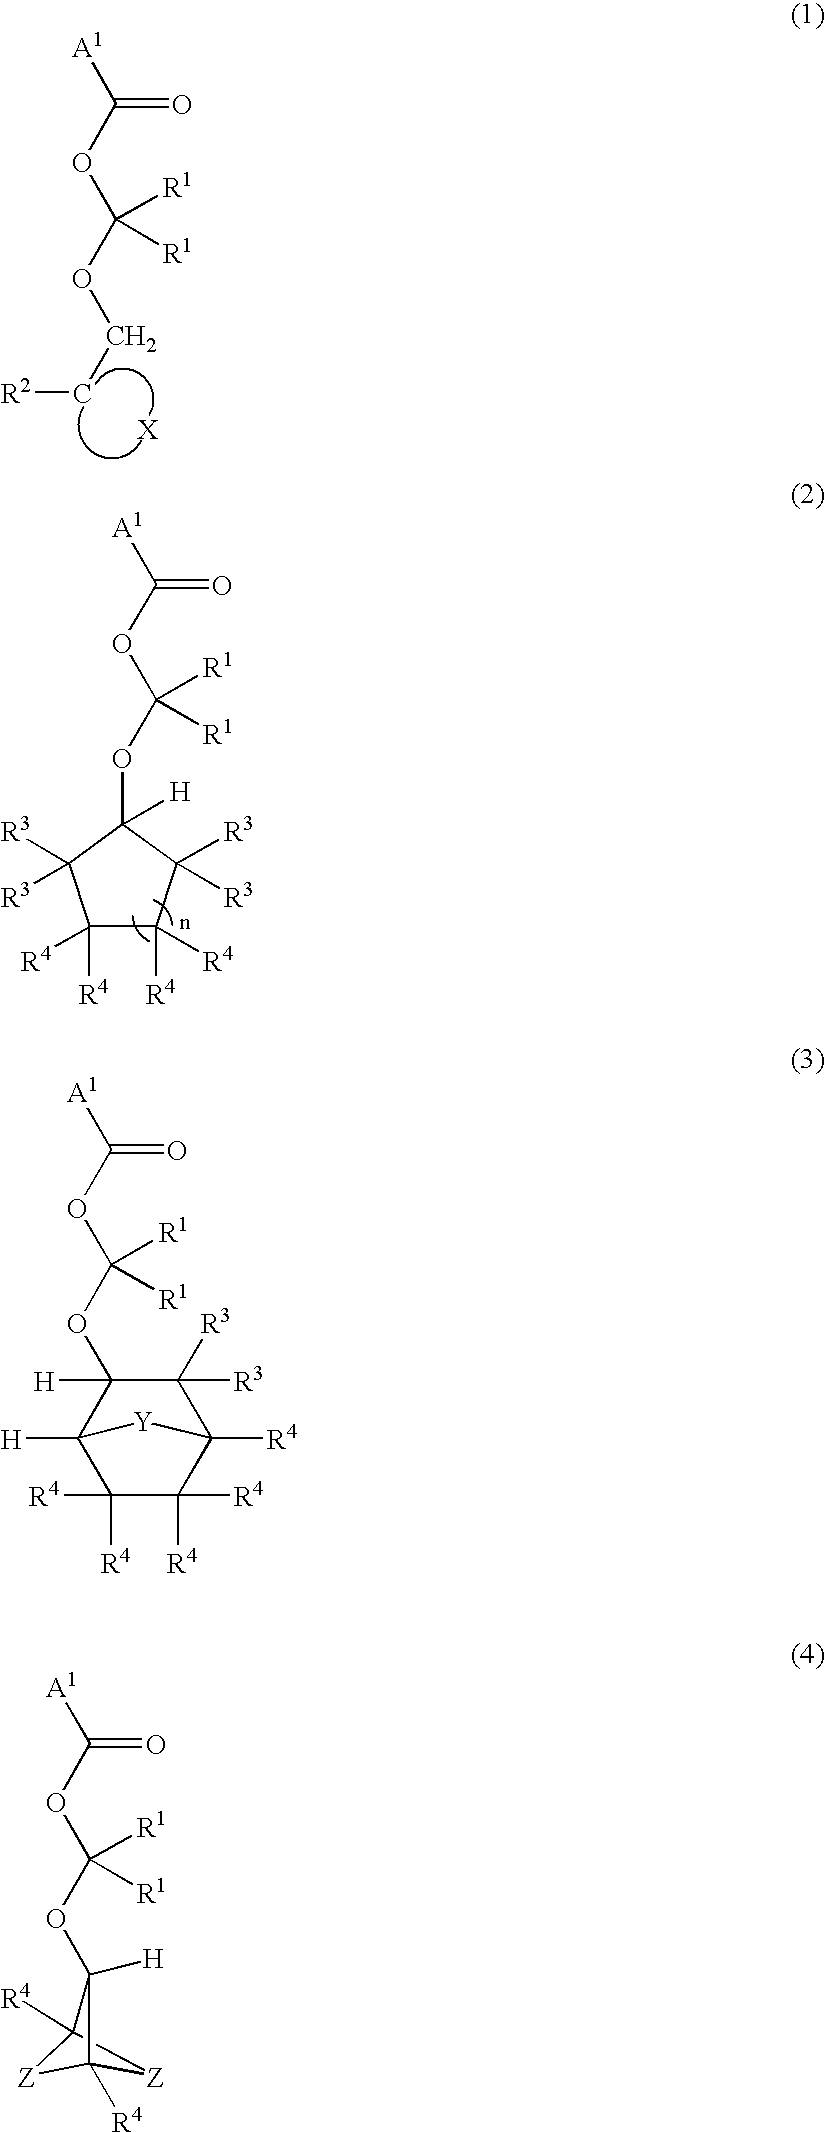 Polymerizable ester compounds, polymers, resist compositions and patterning process